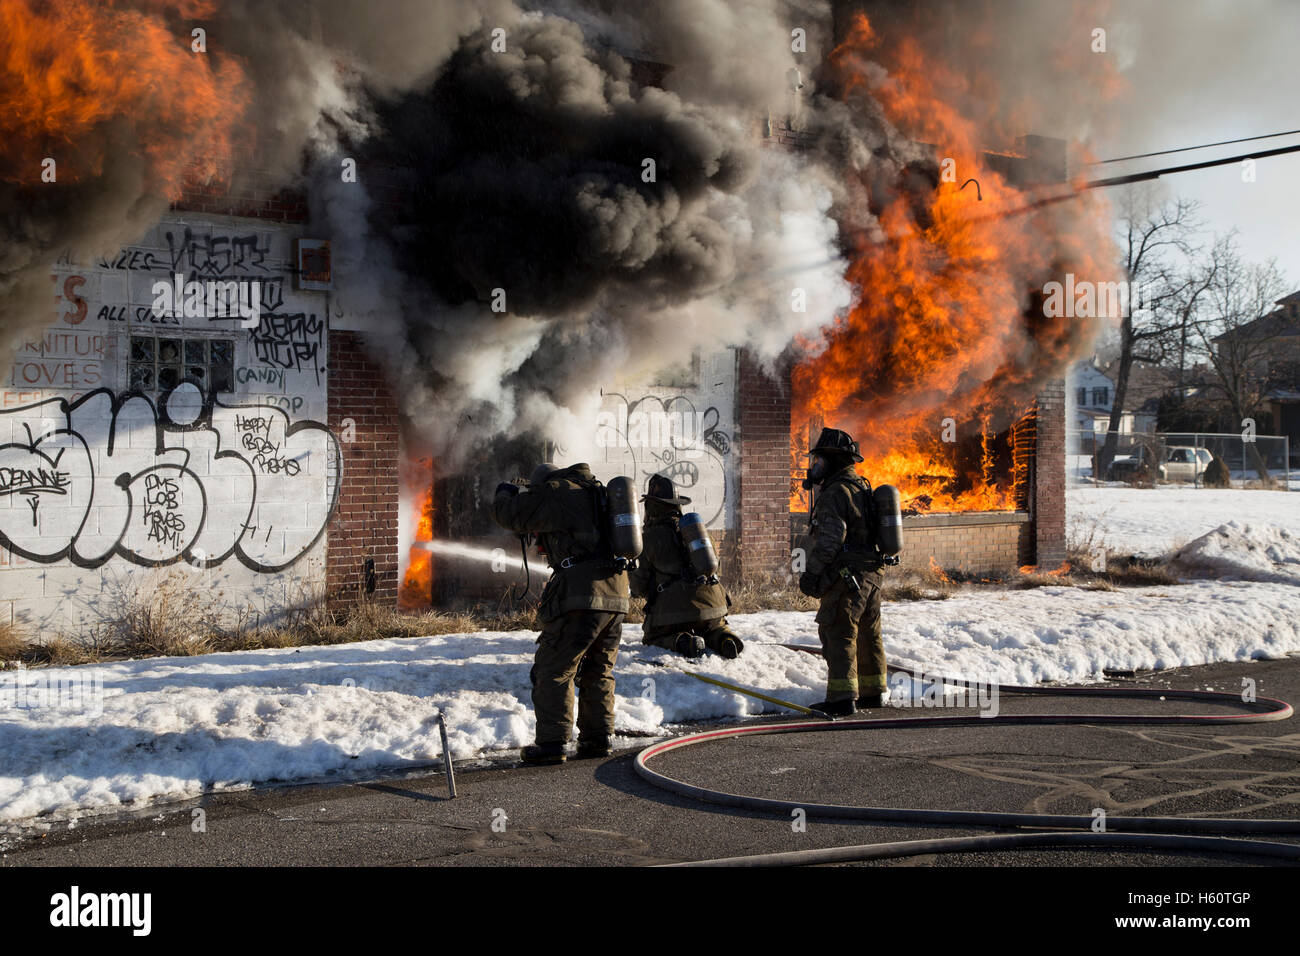 Firefighters extinguishing fire in vacant commercial building, Detroit, Michigan USA Stock Photo